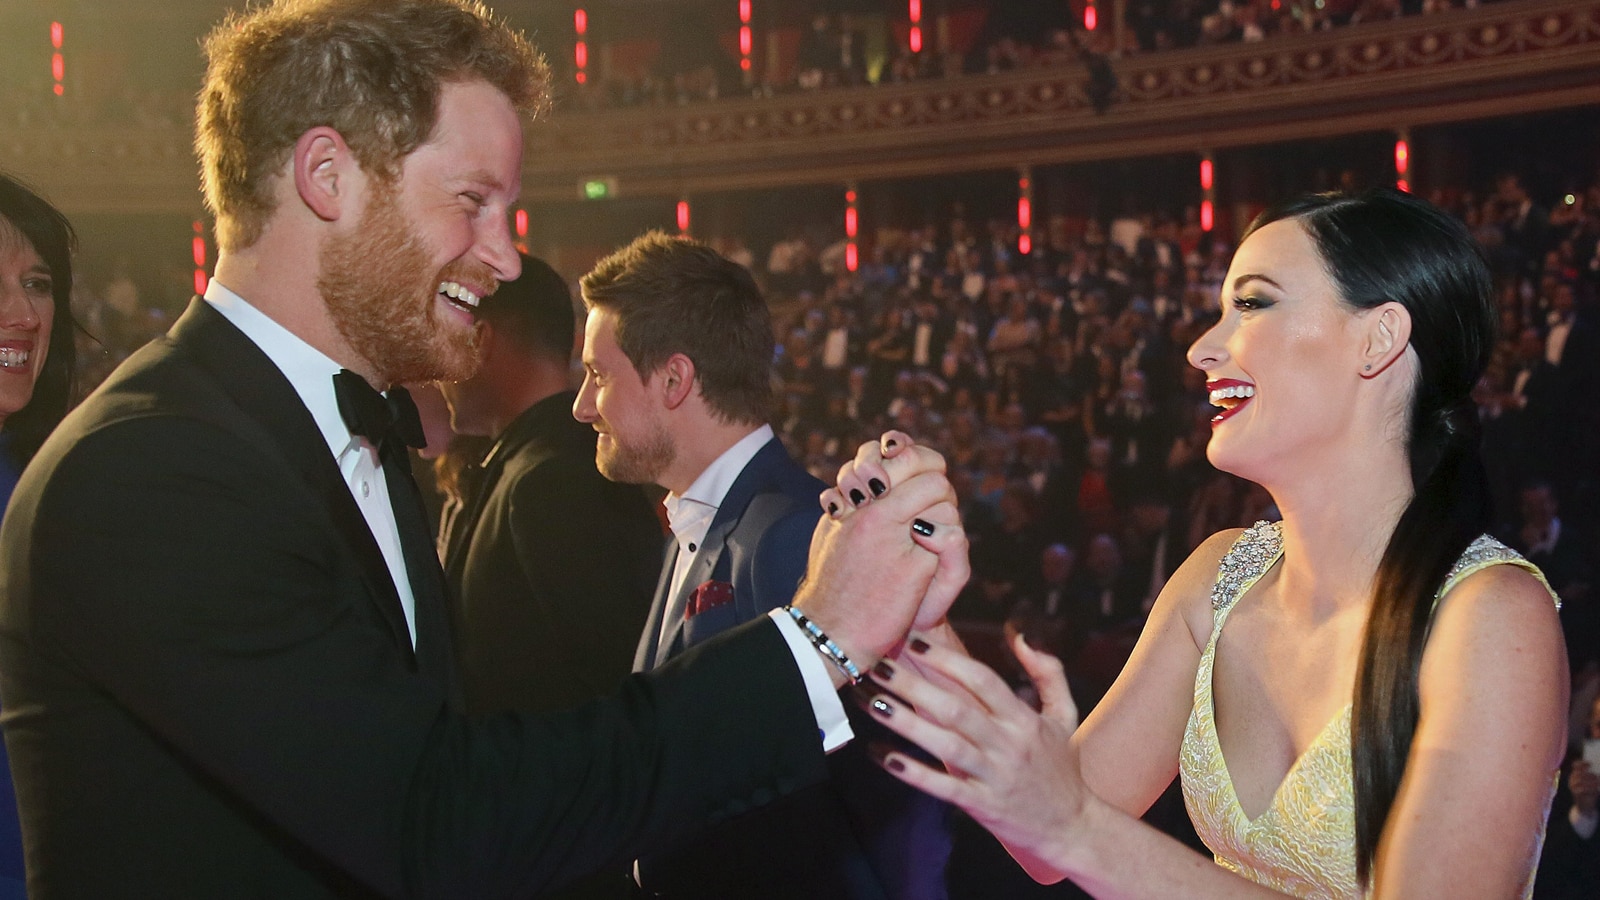 180309_3681389_Kacey_Musgraves_High_fived_Prince_Harry___Br photo